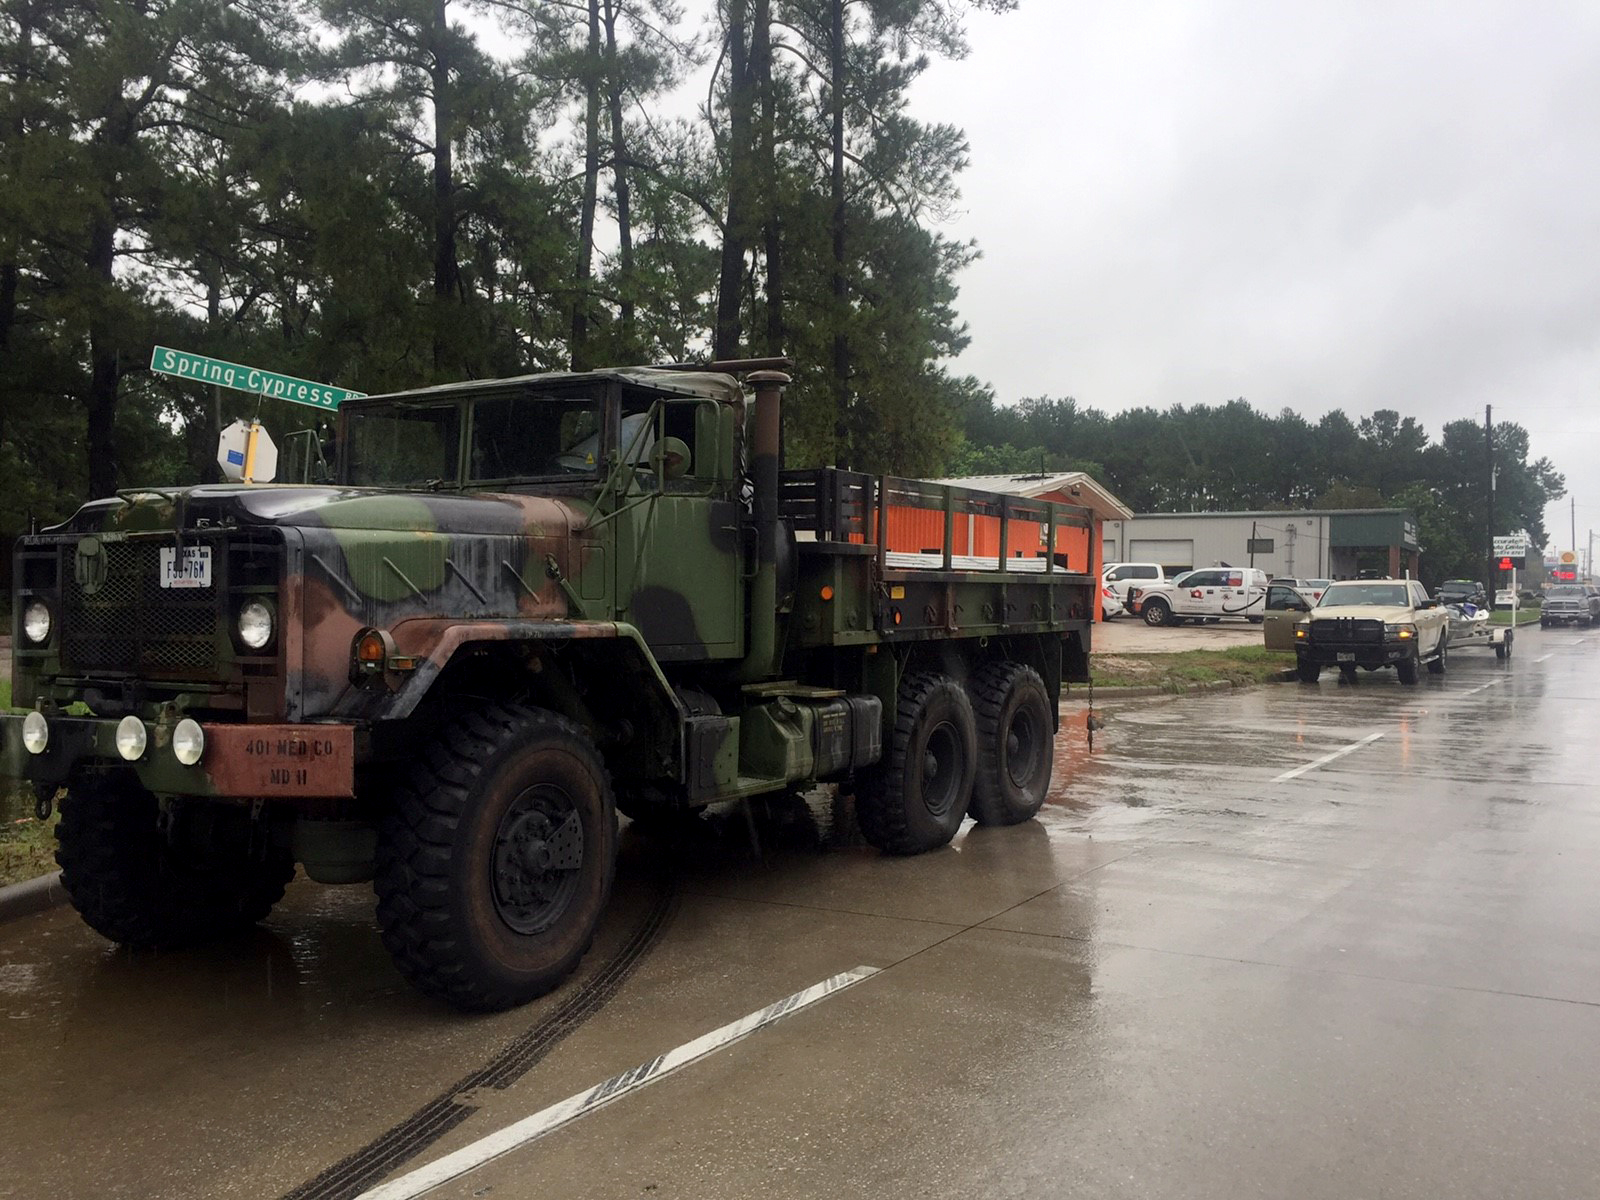 PHOTO: Civilian-owned trucks that were formerly used by the U.S. military are also being used for volunteer-conducted rescue missions.